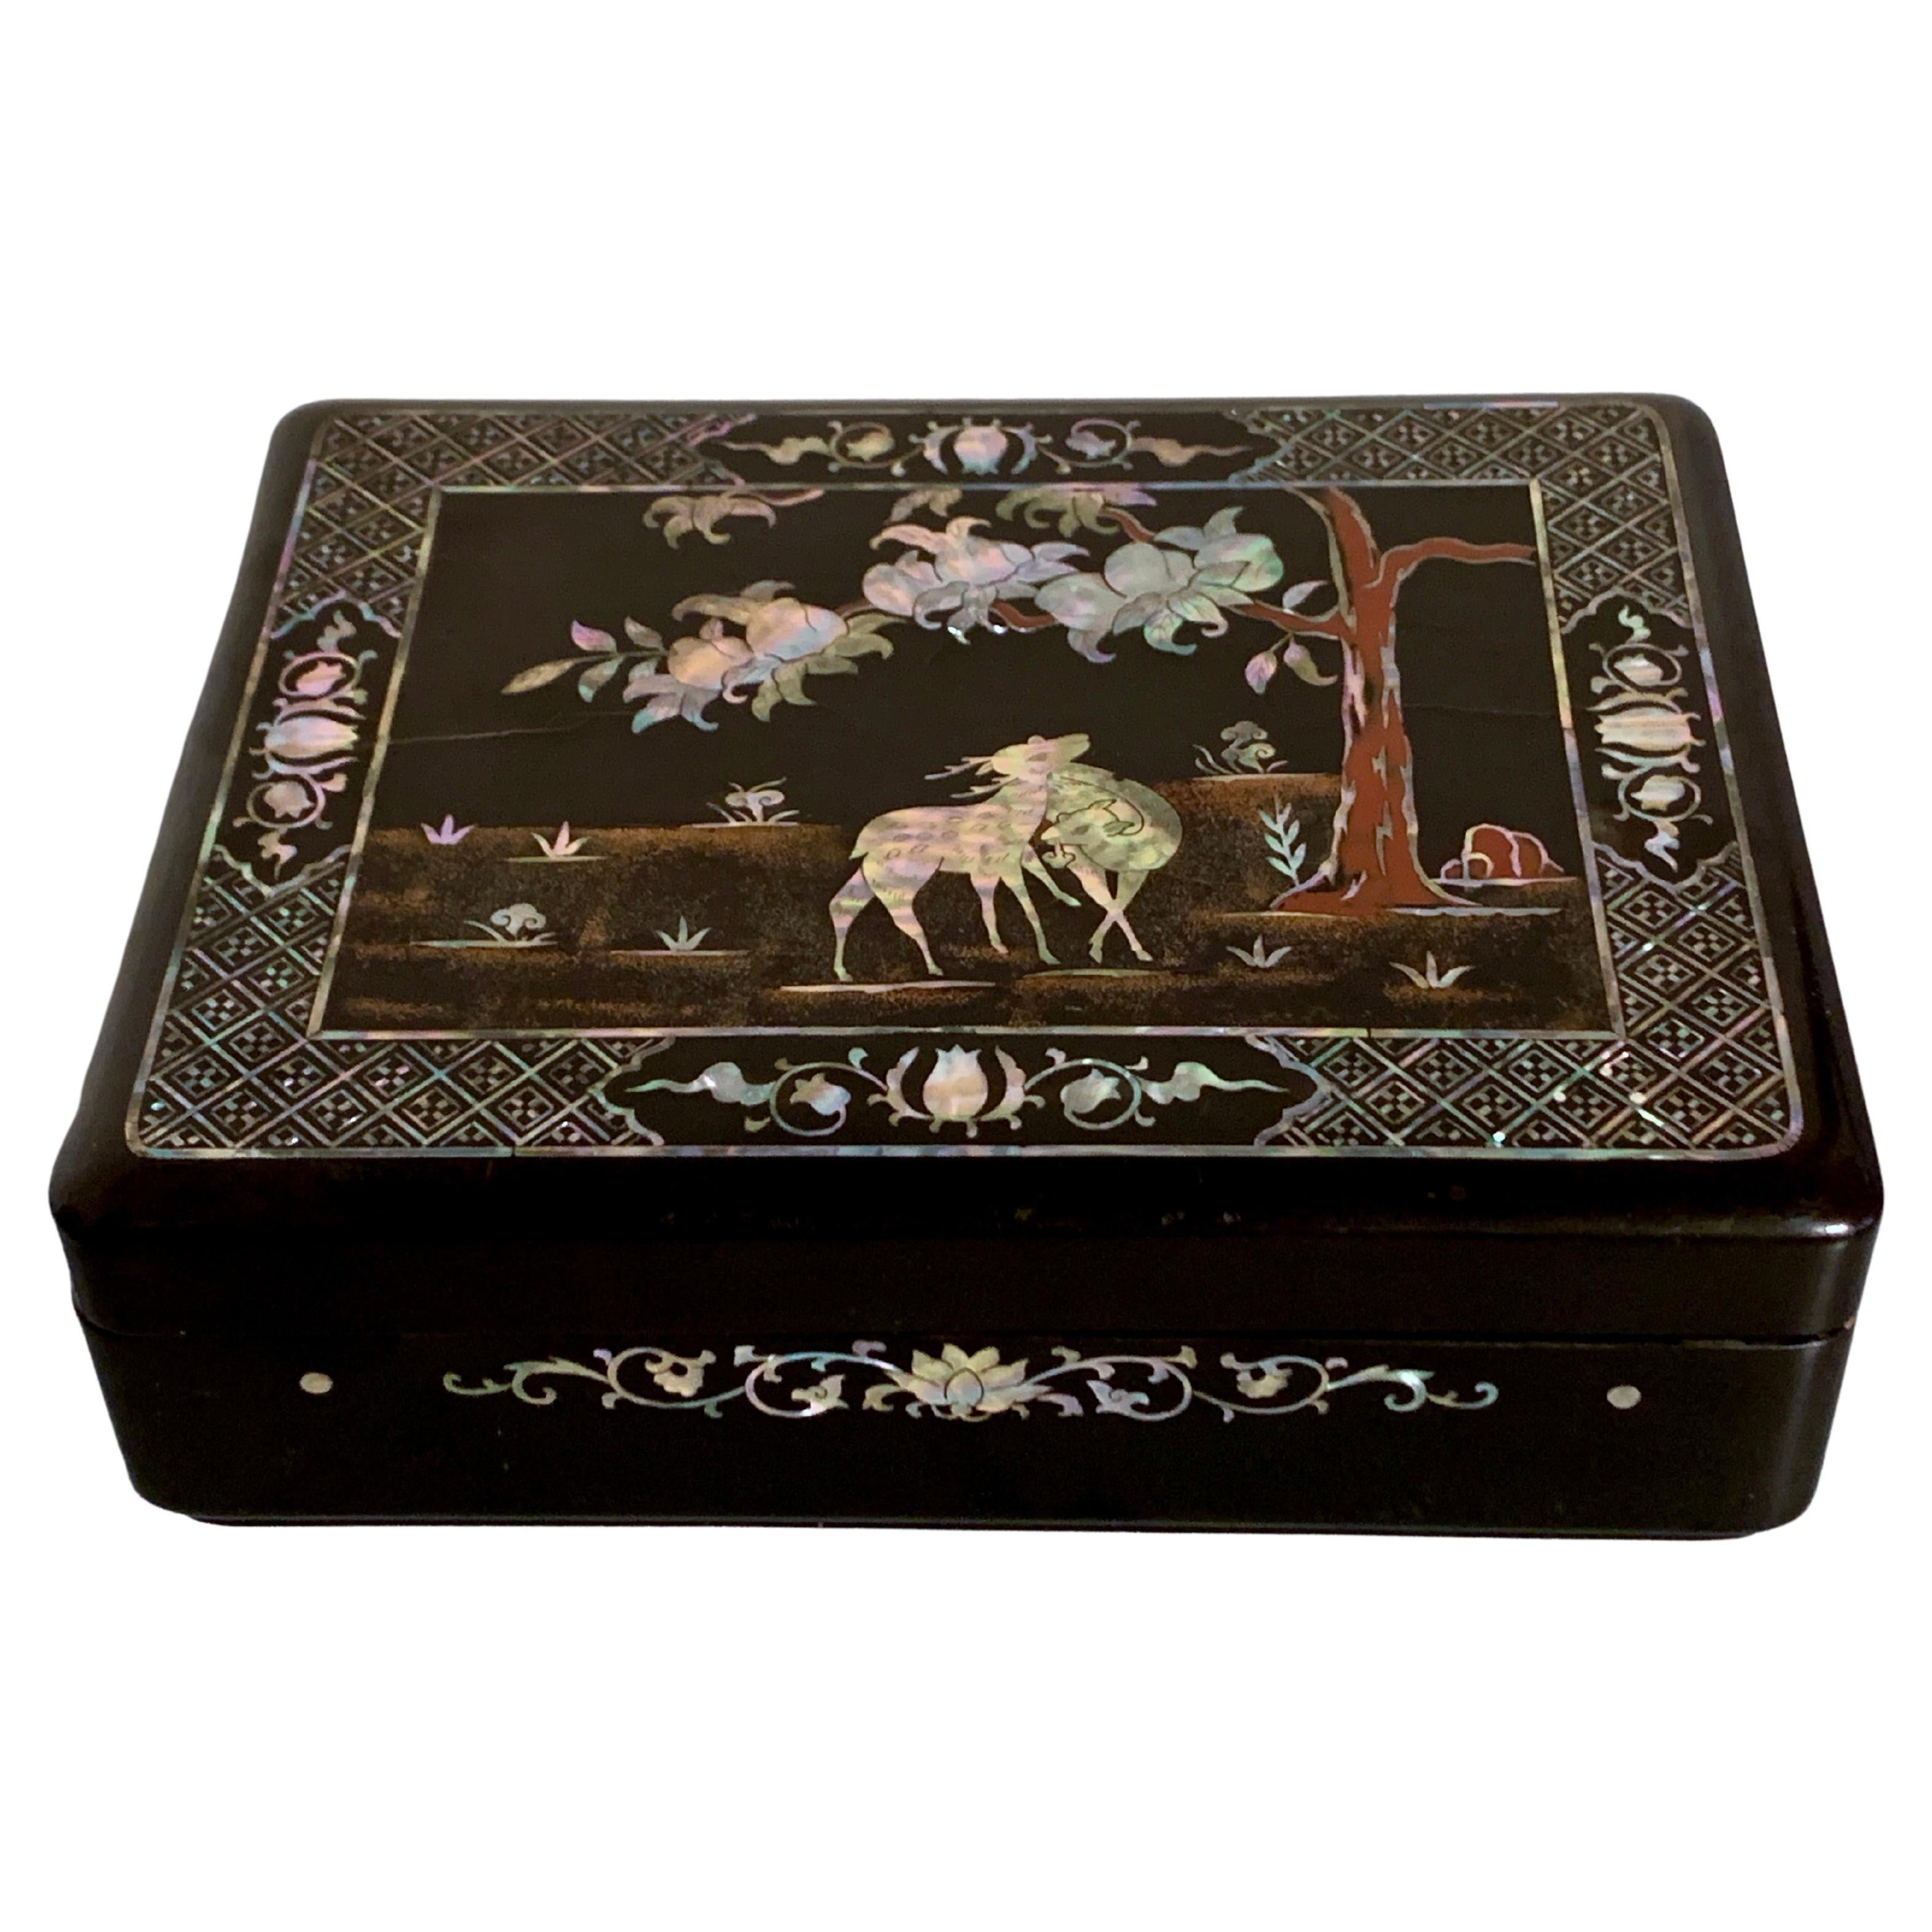 Korean Lacquer and Mother of Pearl Inlay "Longevity" Box, 1930s, Korea